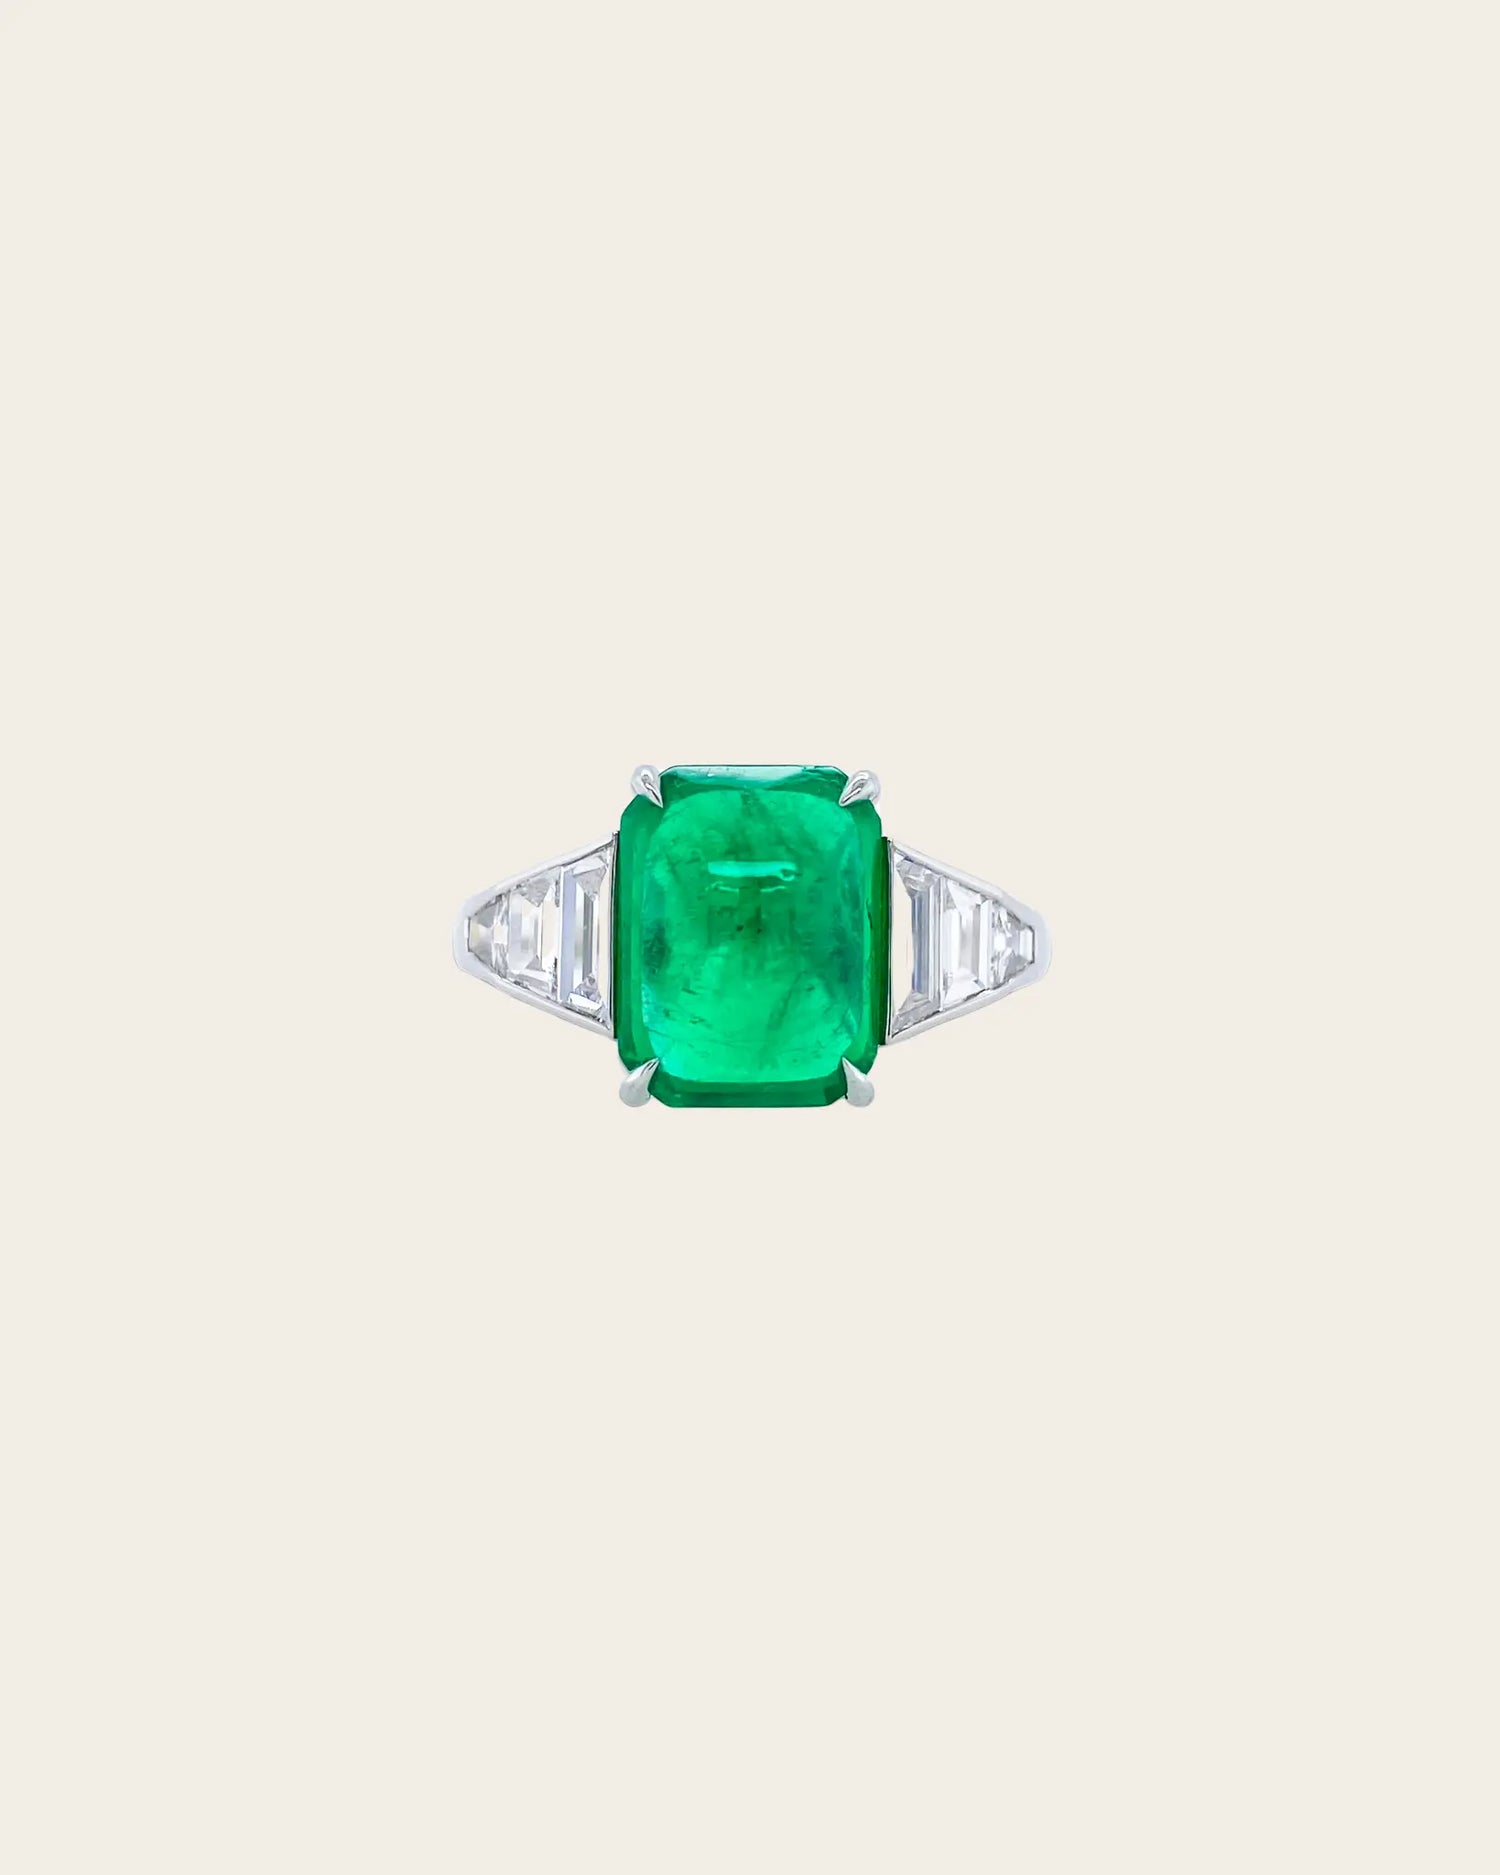 One of a Kind Colombian Emerald Ring One of a Kind Colombian Emerald Ring Bayco Bayco  Squash Blossom Vail